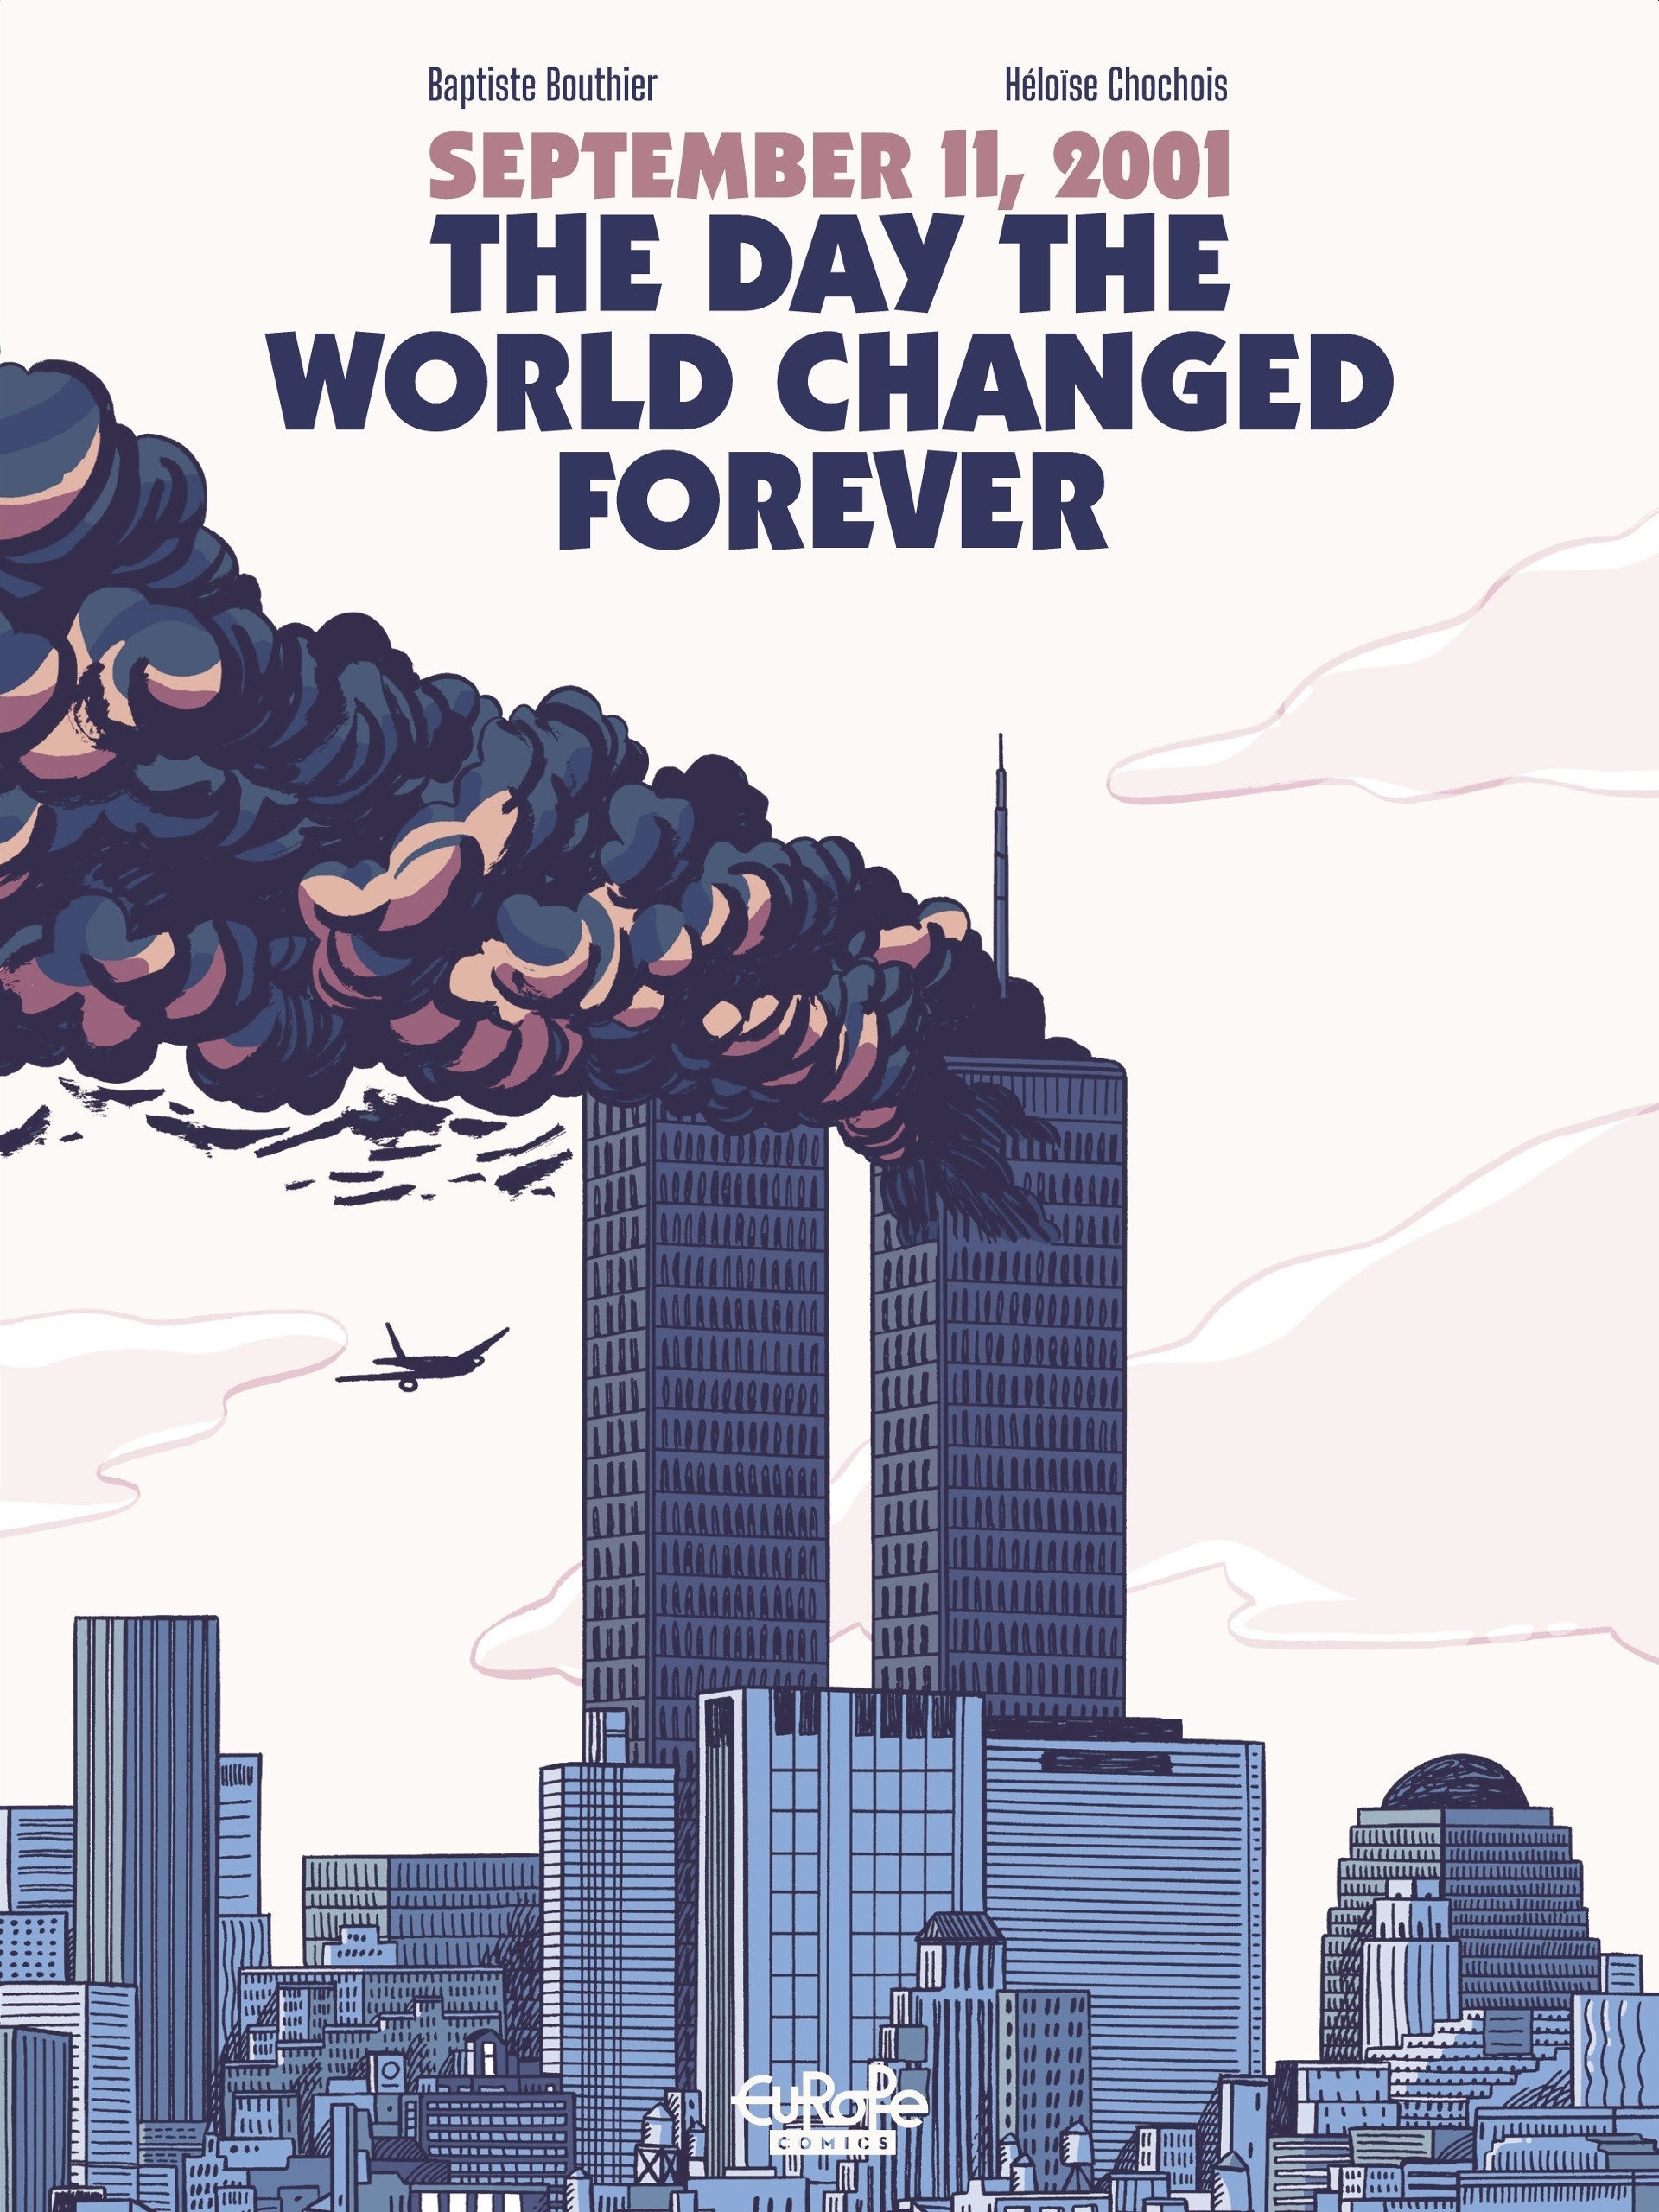 Read online September 11, 2001: The Day the World Changed Forever comic -  Issue # TPB - 1